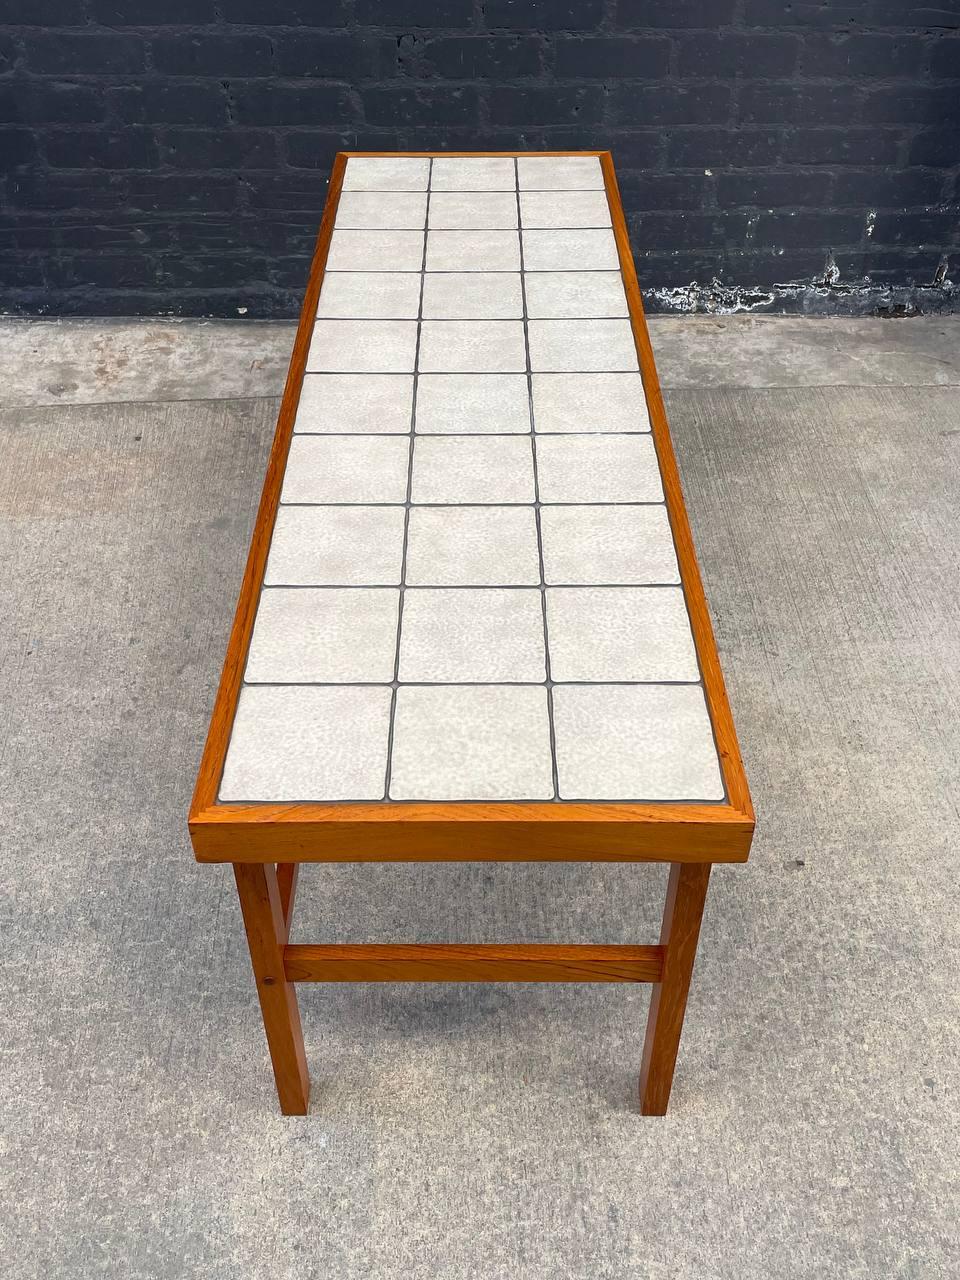 Mid-20th Century Mid-Century Danish Modern Teak & Ceramic Top Console Table by Trioh For Sale